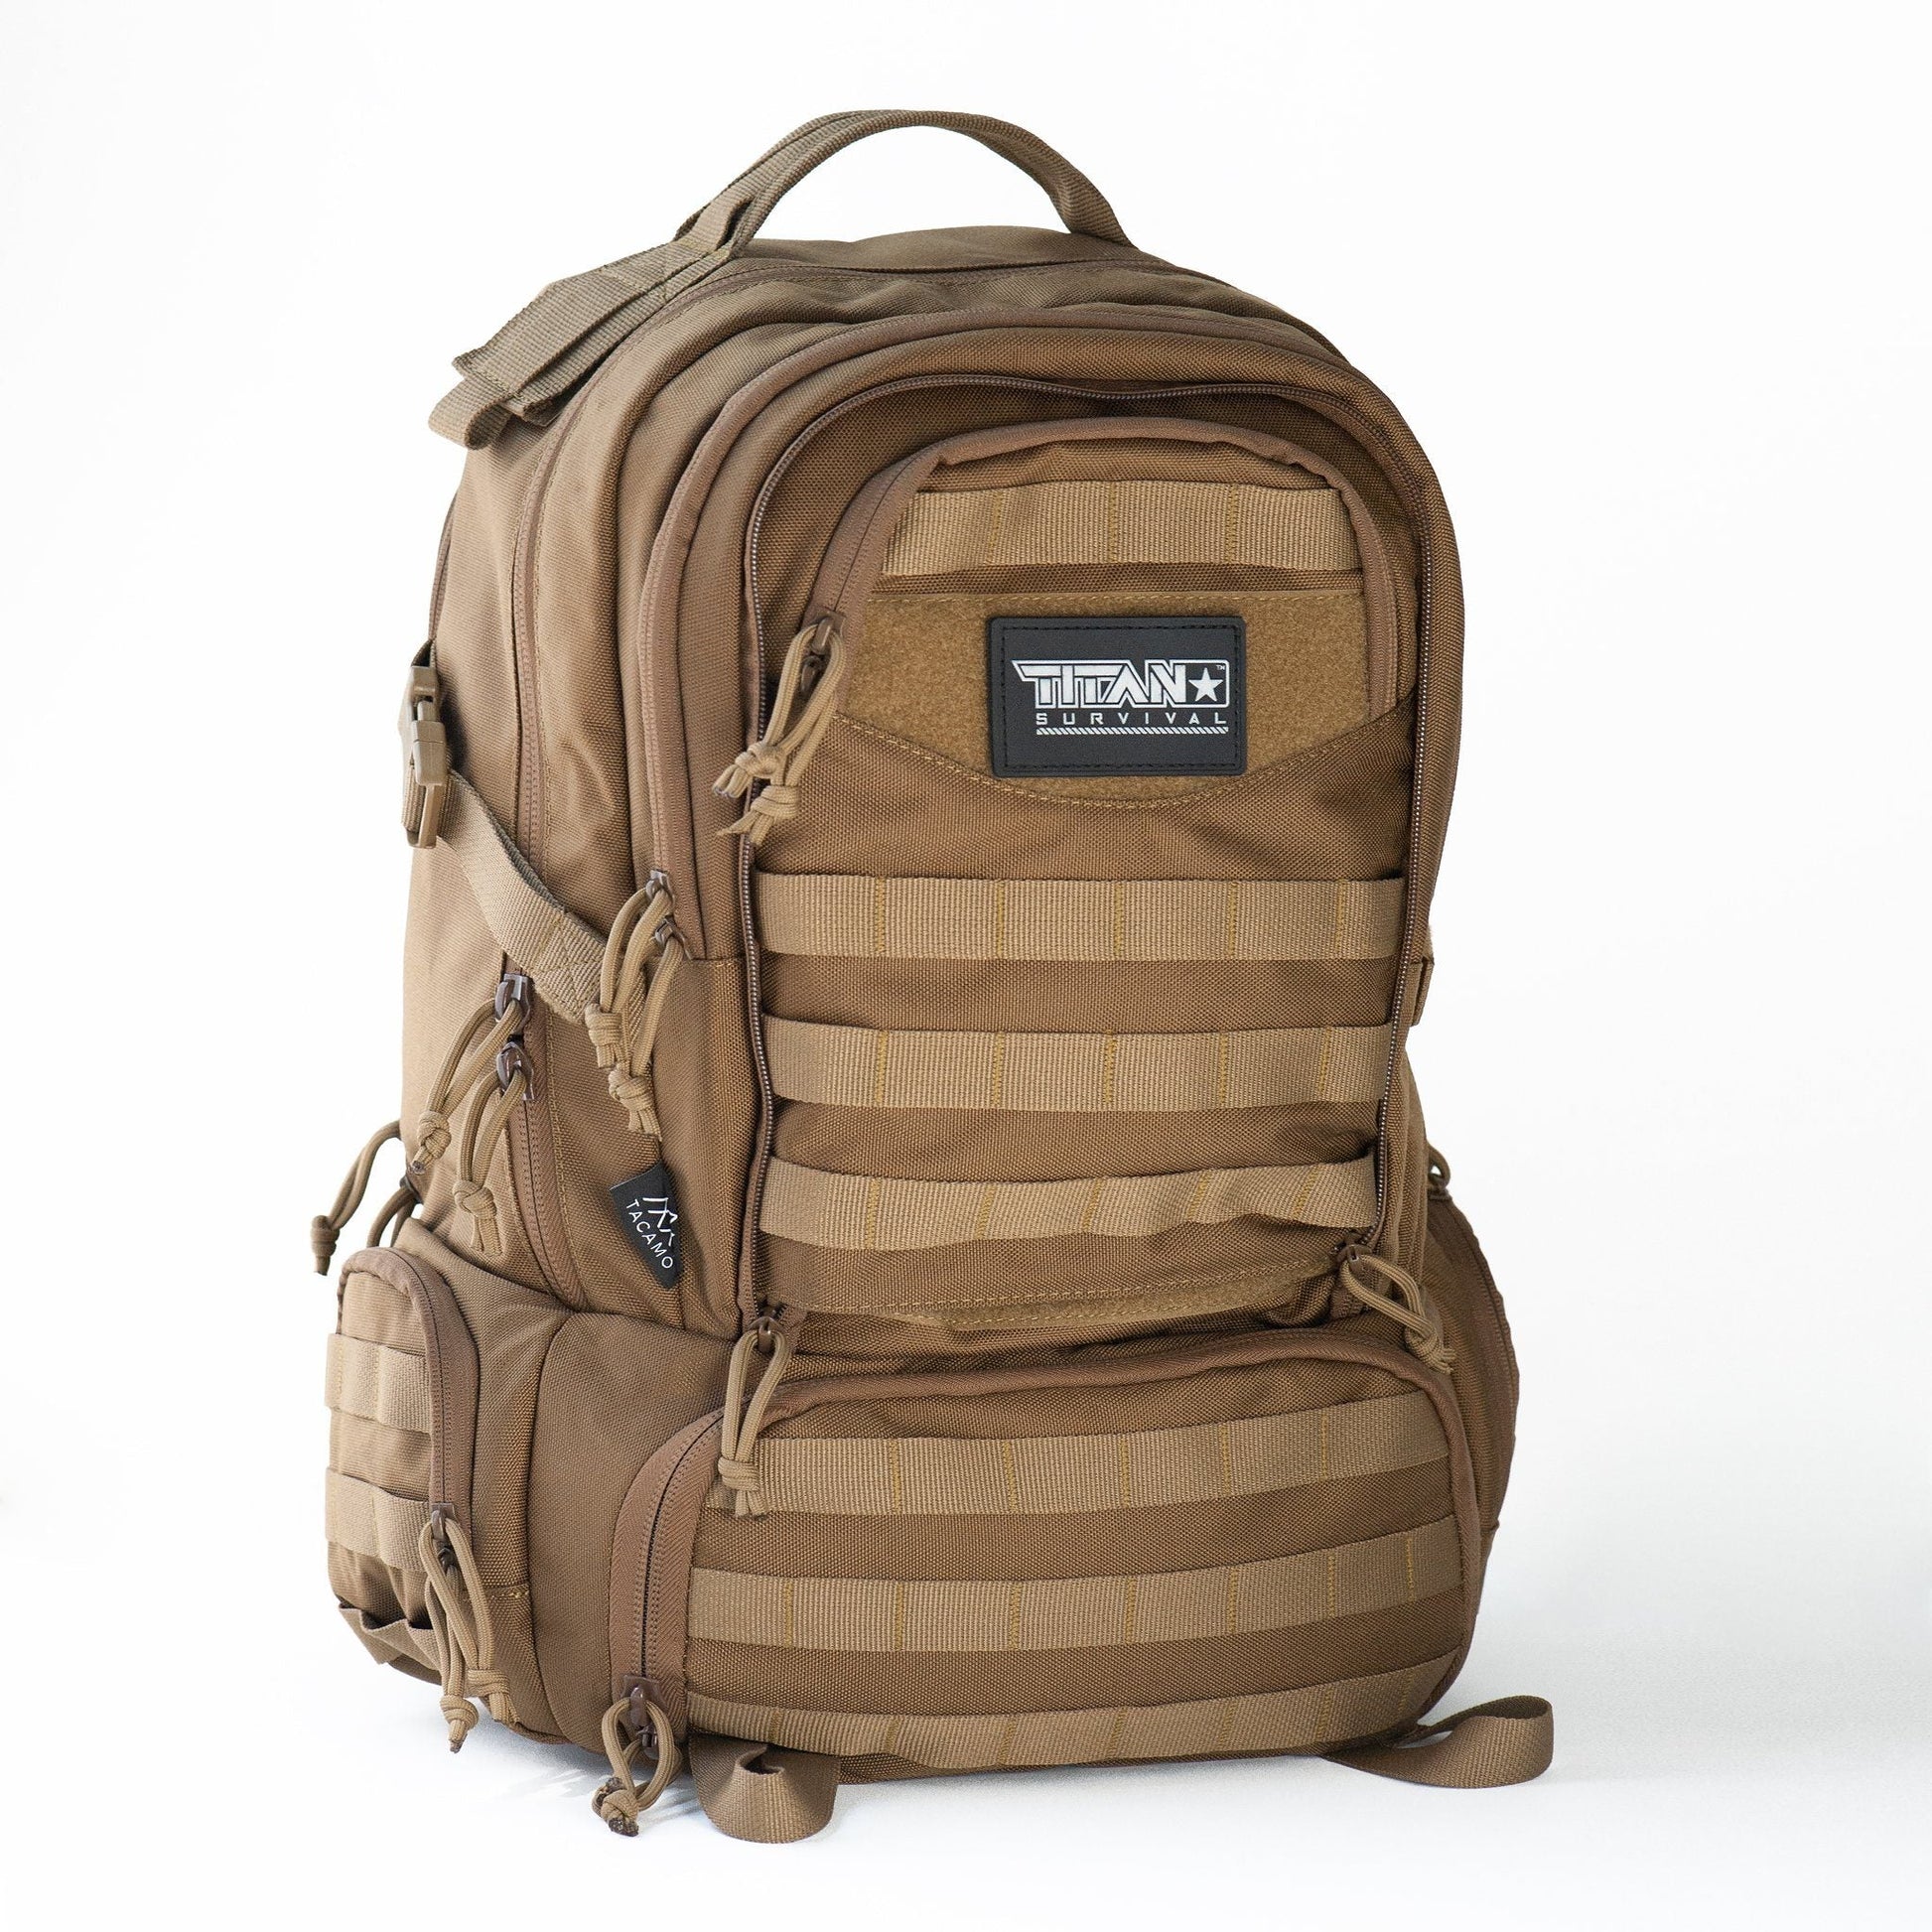 The BC50 50L Tactical Backpack constructed from durable brown material